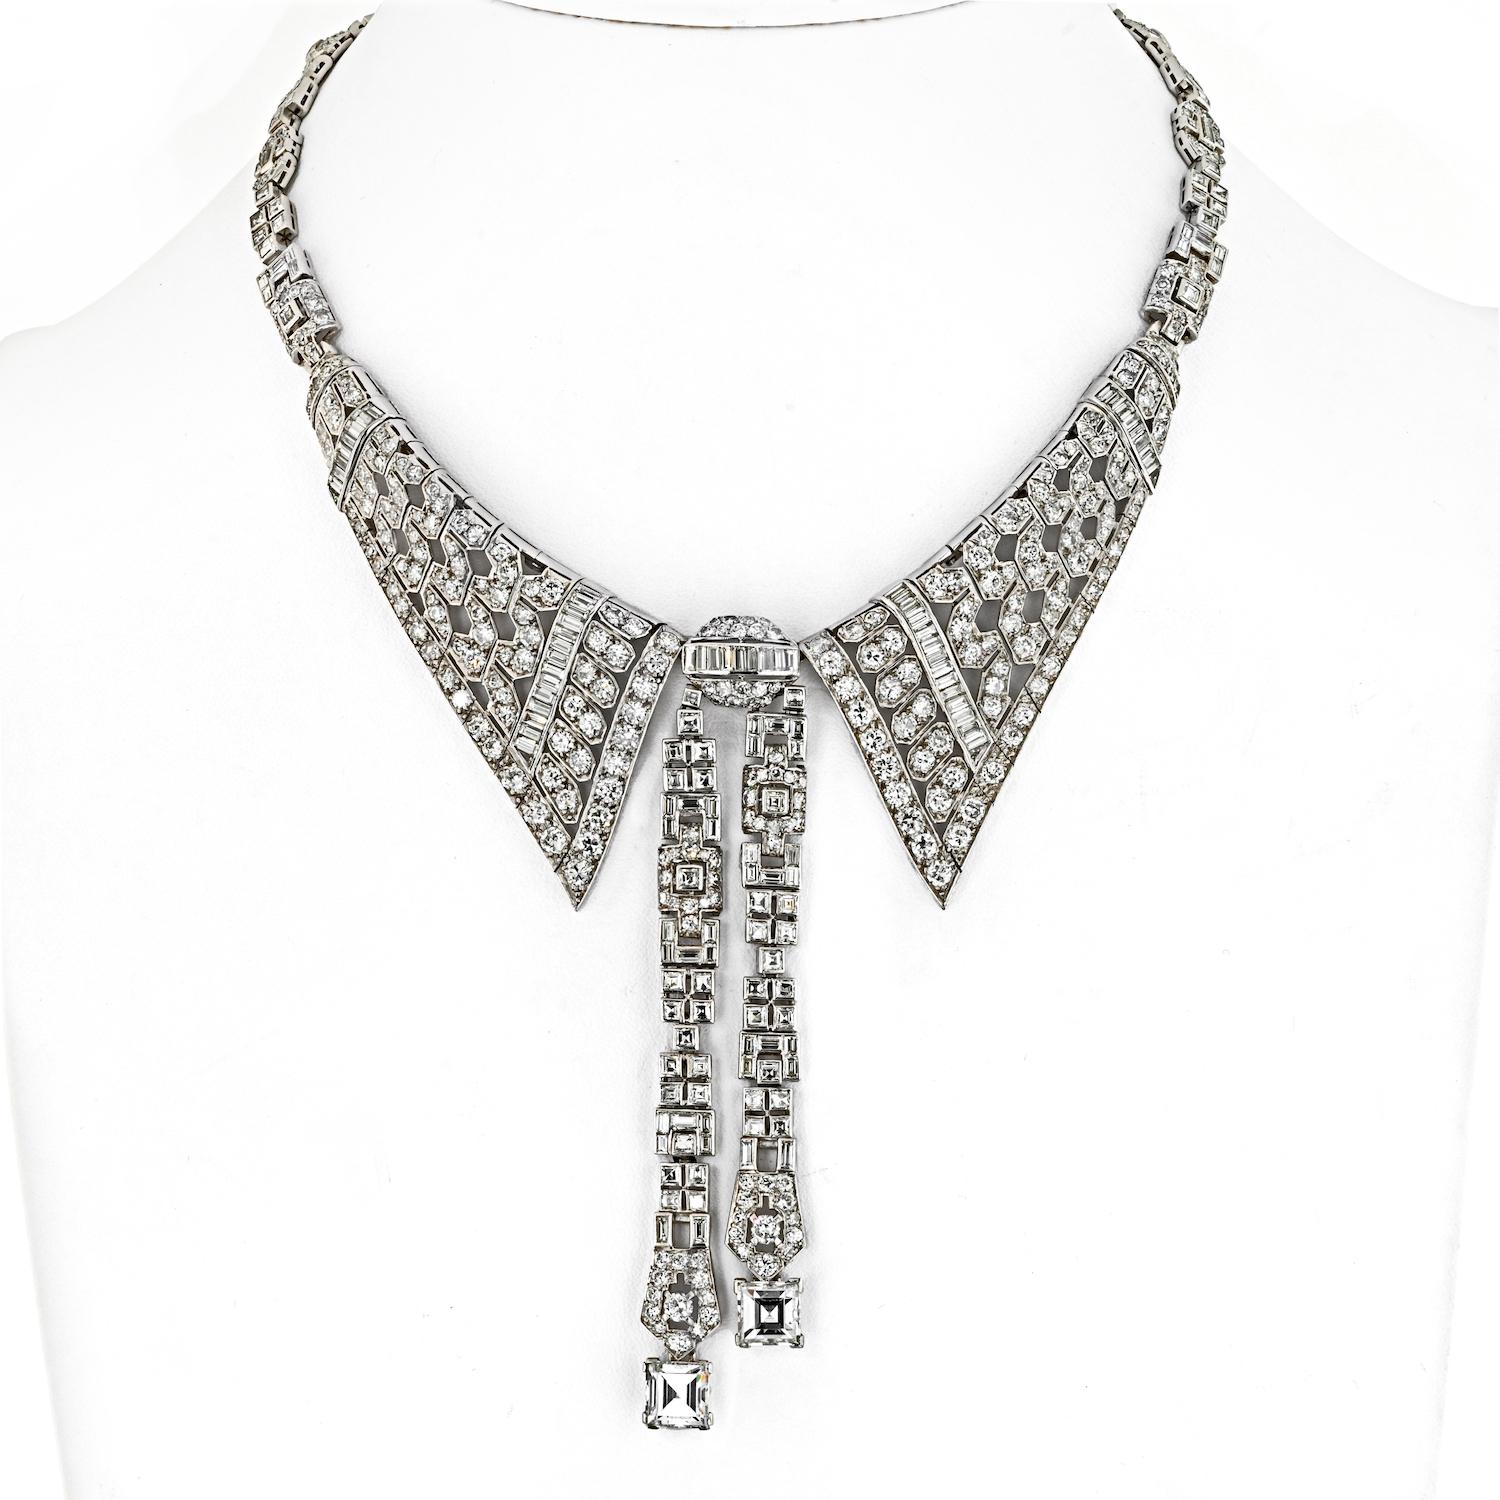 This beautiful timeless elegance of this estate platinum necklace is reminiscent of a sophisticated shirt collar. This exquisite Art Deco piece features a lavalier design adorned with a captivating array of mixed-cut diamonds. The meticulous